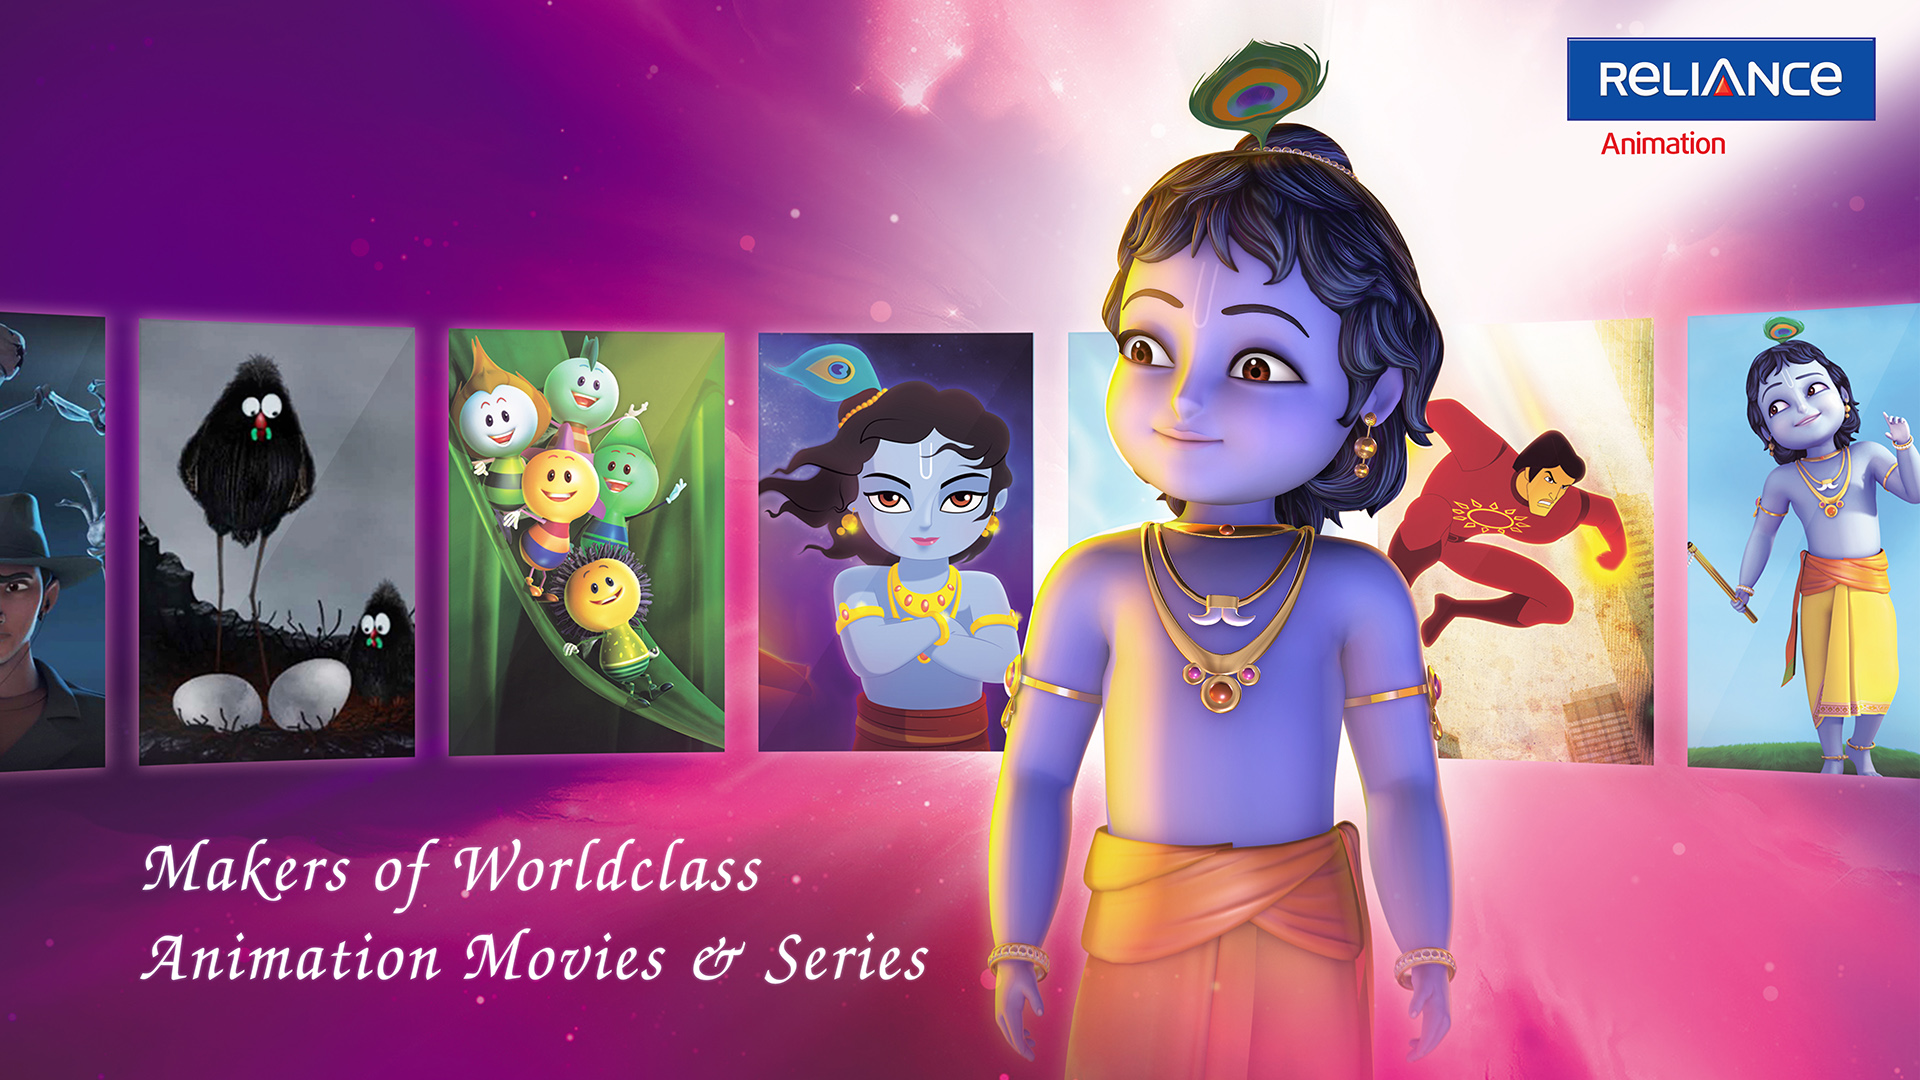 About Us - Reliance Animation, Indian Animation Studio